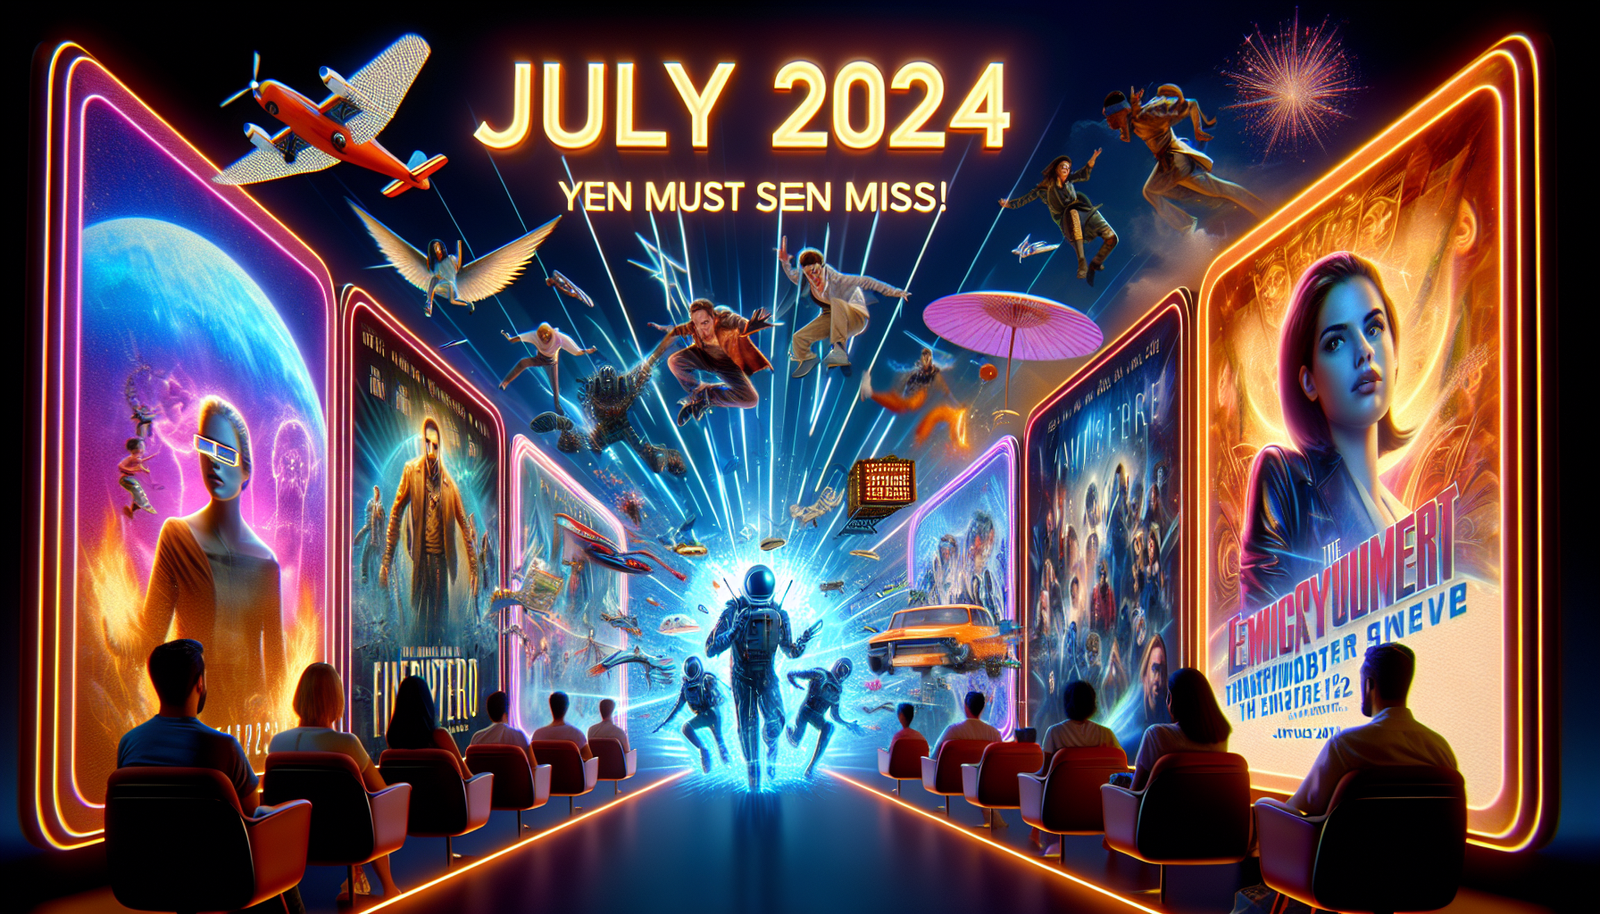 discover the incredible new shows and movies coming to netflix in july 2024 that you simply can't afford to miss. get ready to be amazed!